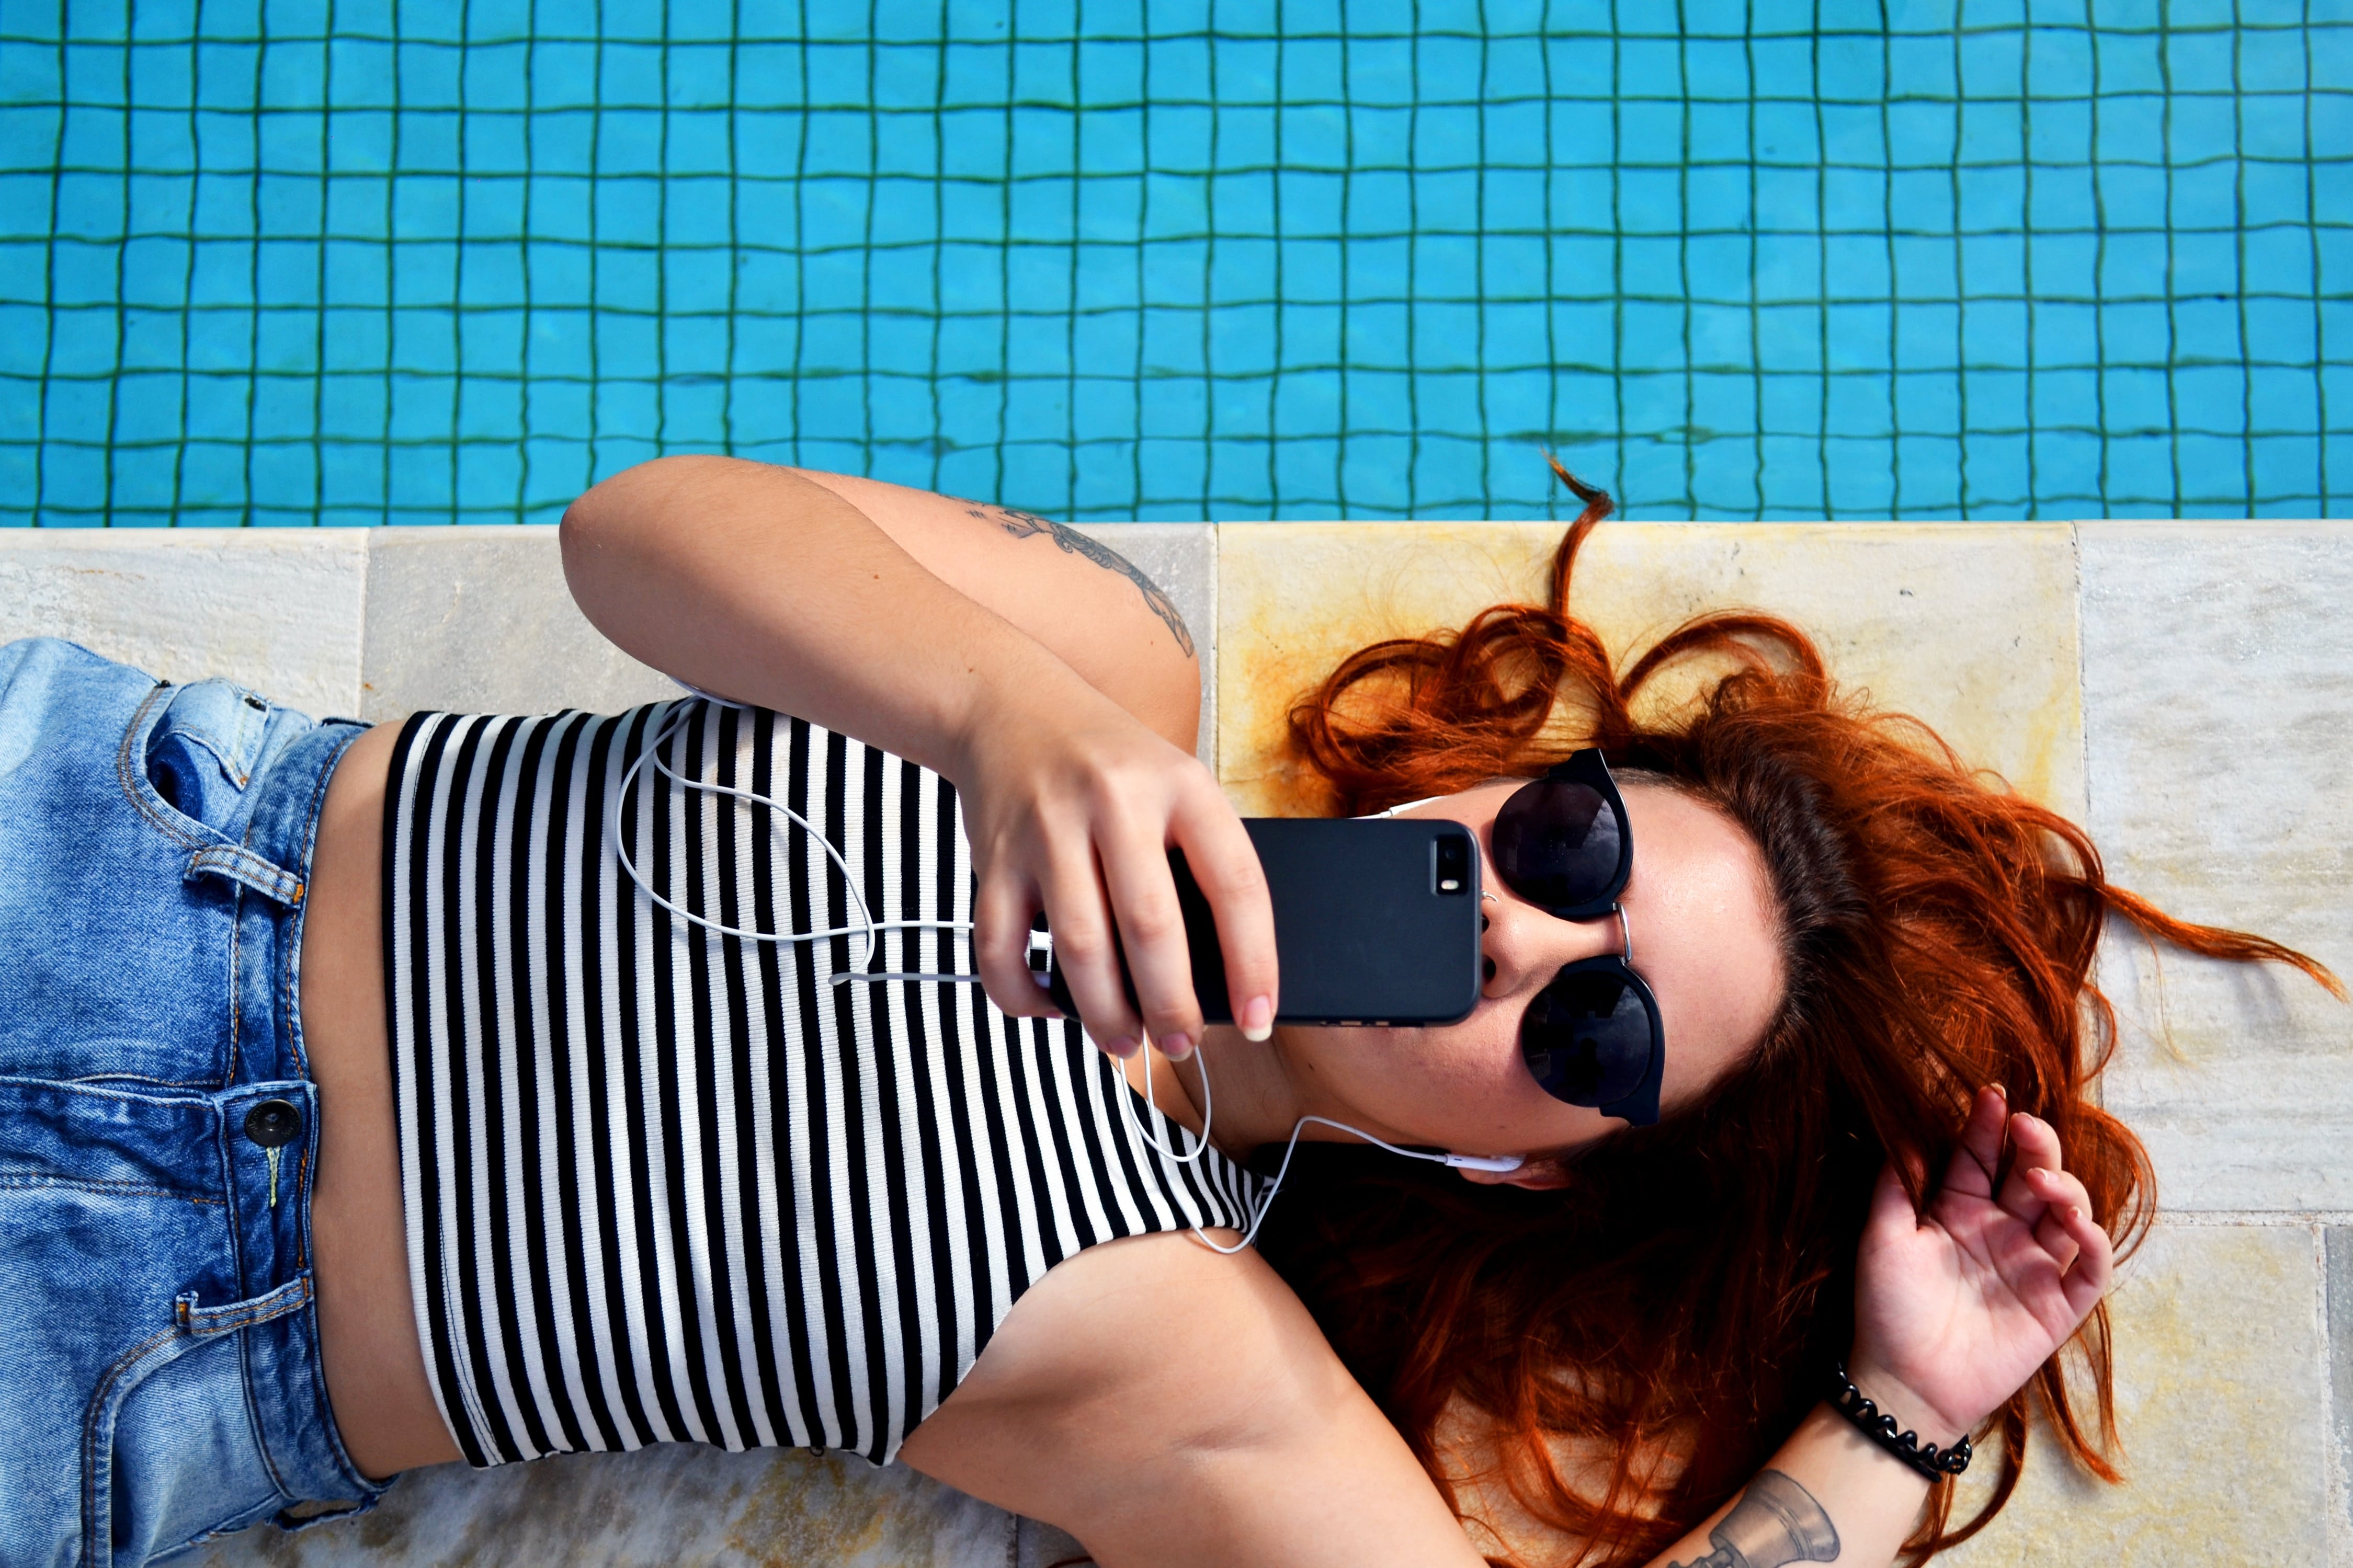 Woman lying down looking at phone wearing sunglasses